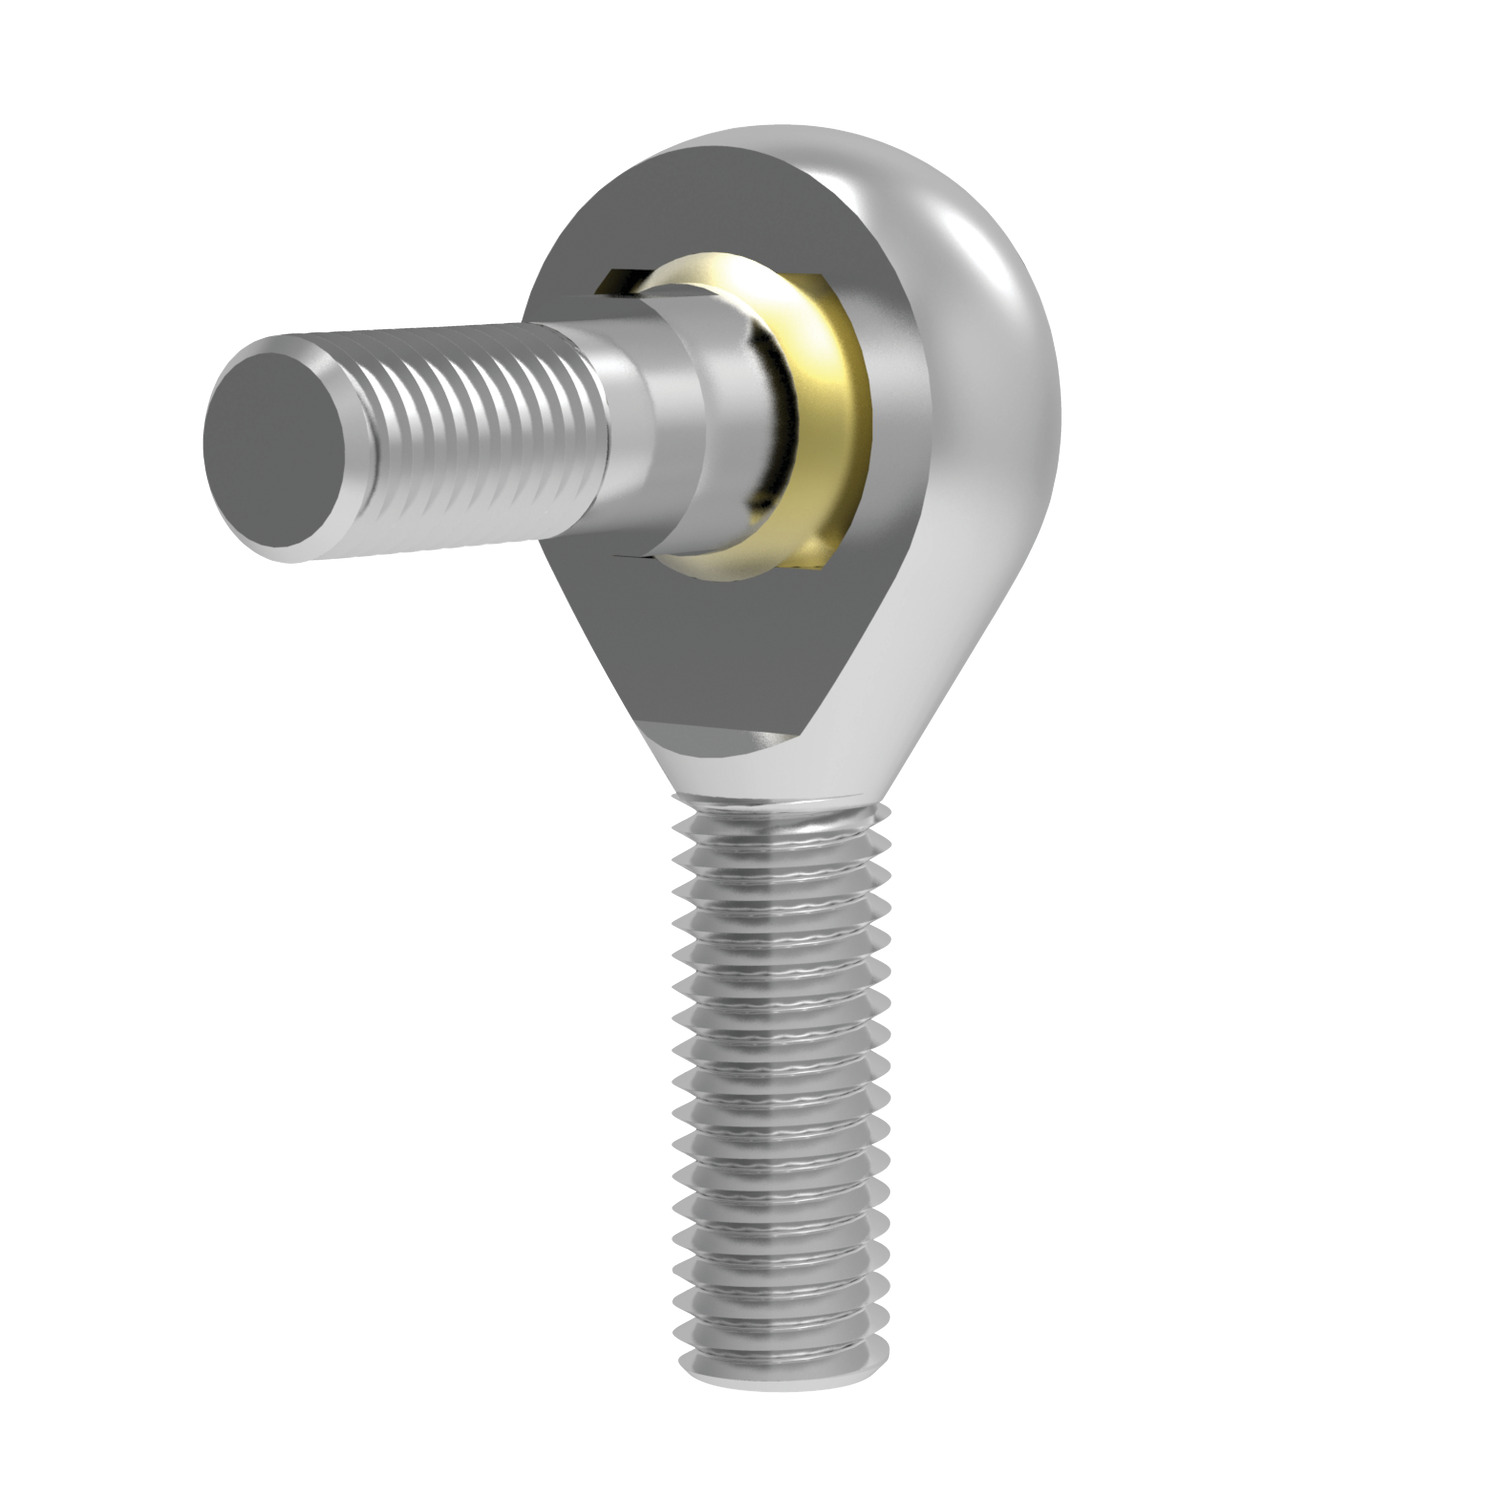 Rod End with Stud - Male Zinc plated steel male rod end with stud.